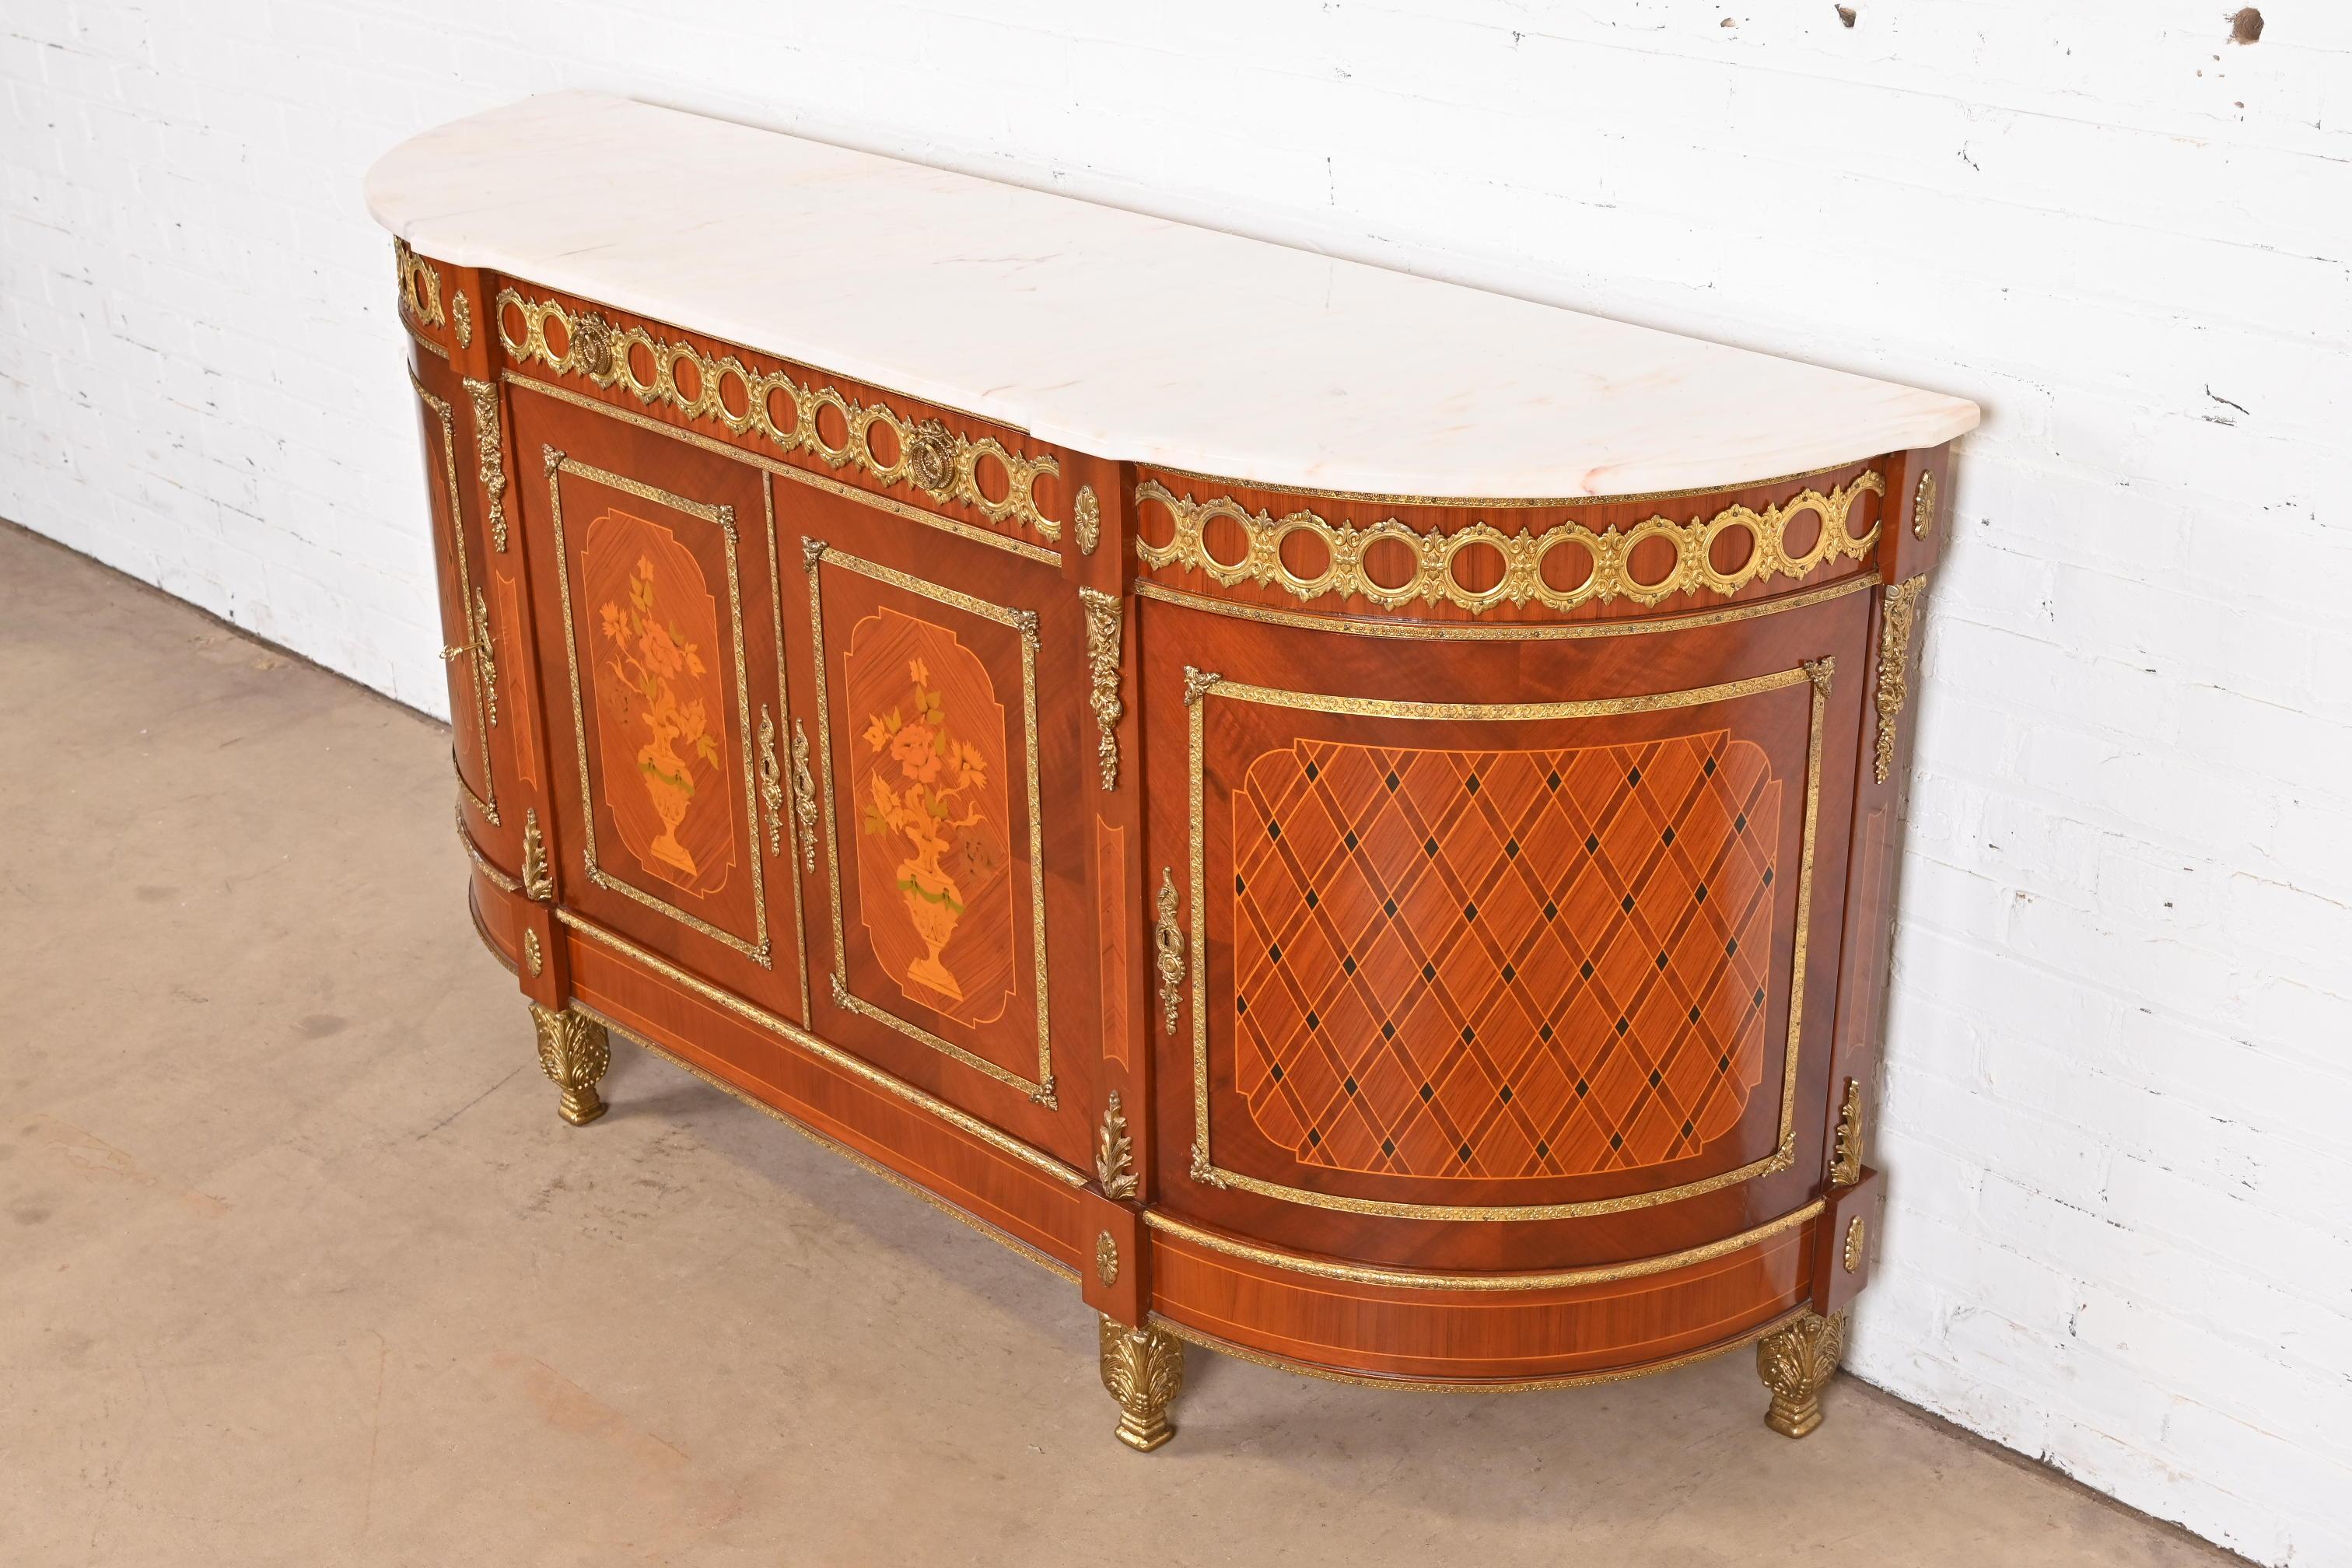 French Louis XVI Kingwood Inlaid Marquetry Marble Top Bronze Mounted Sideboard For Sale 1